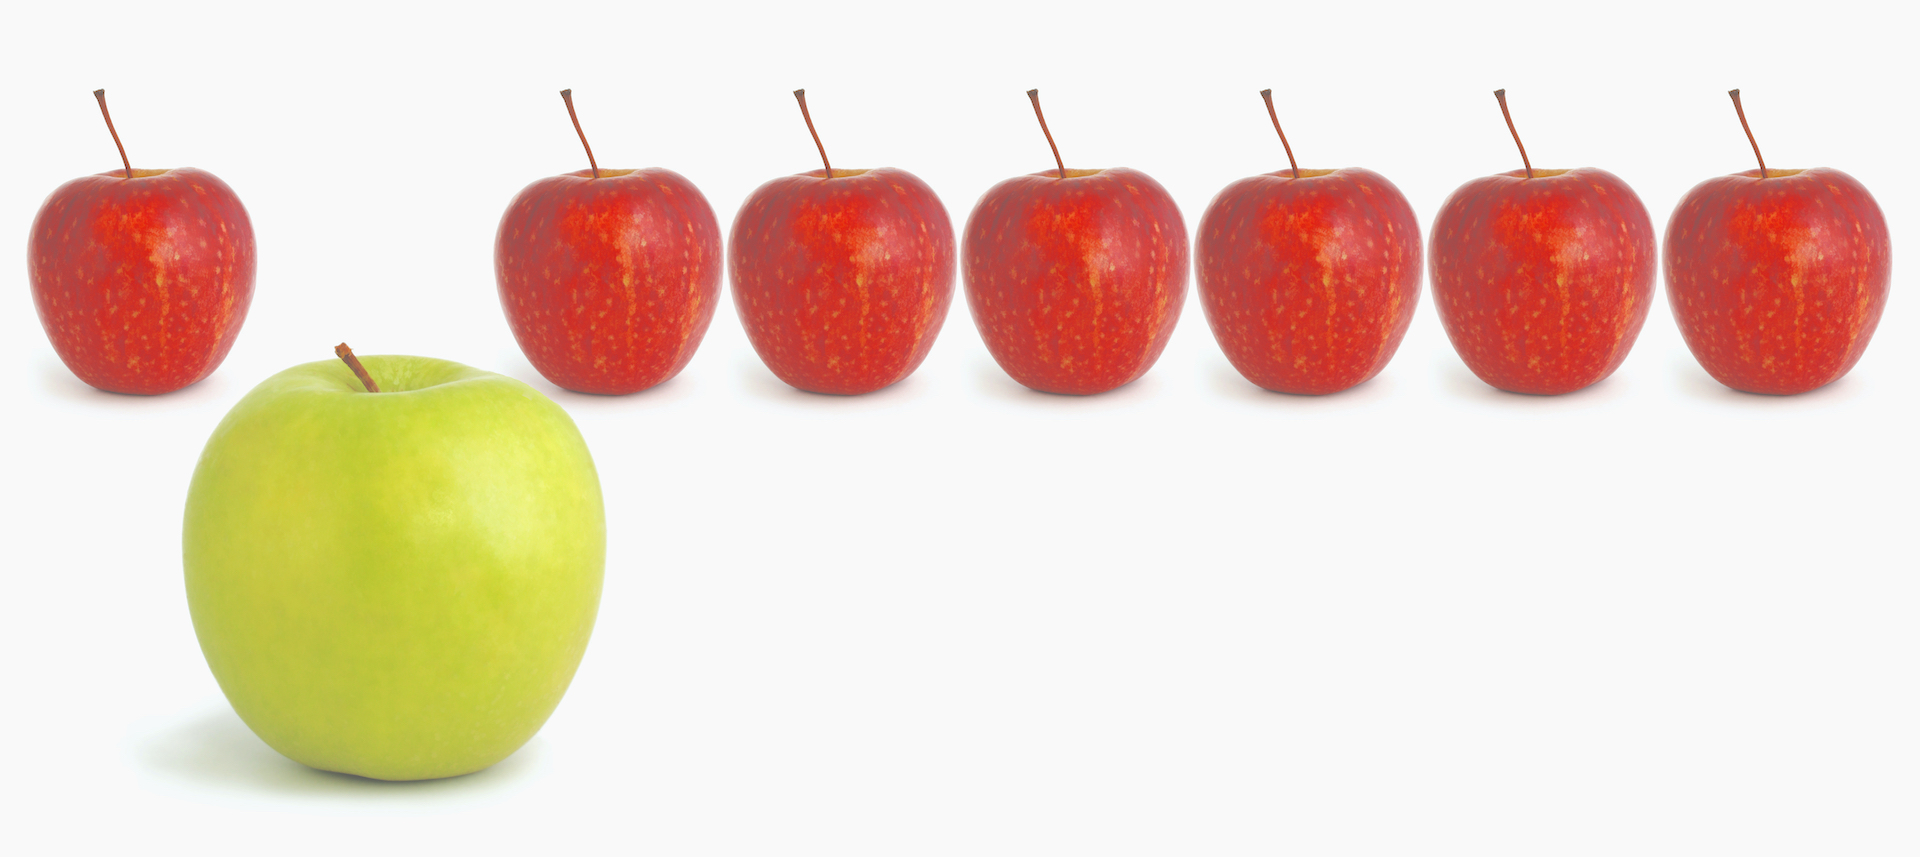 Standing out from the crowd...green apple stands out from a row of red apples.  Business concepts include leadership, individuality, creativity, lateral thinking.